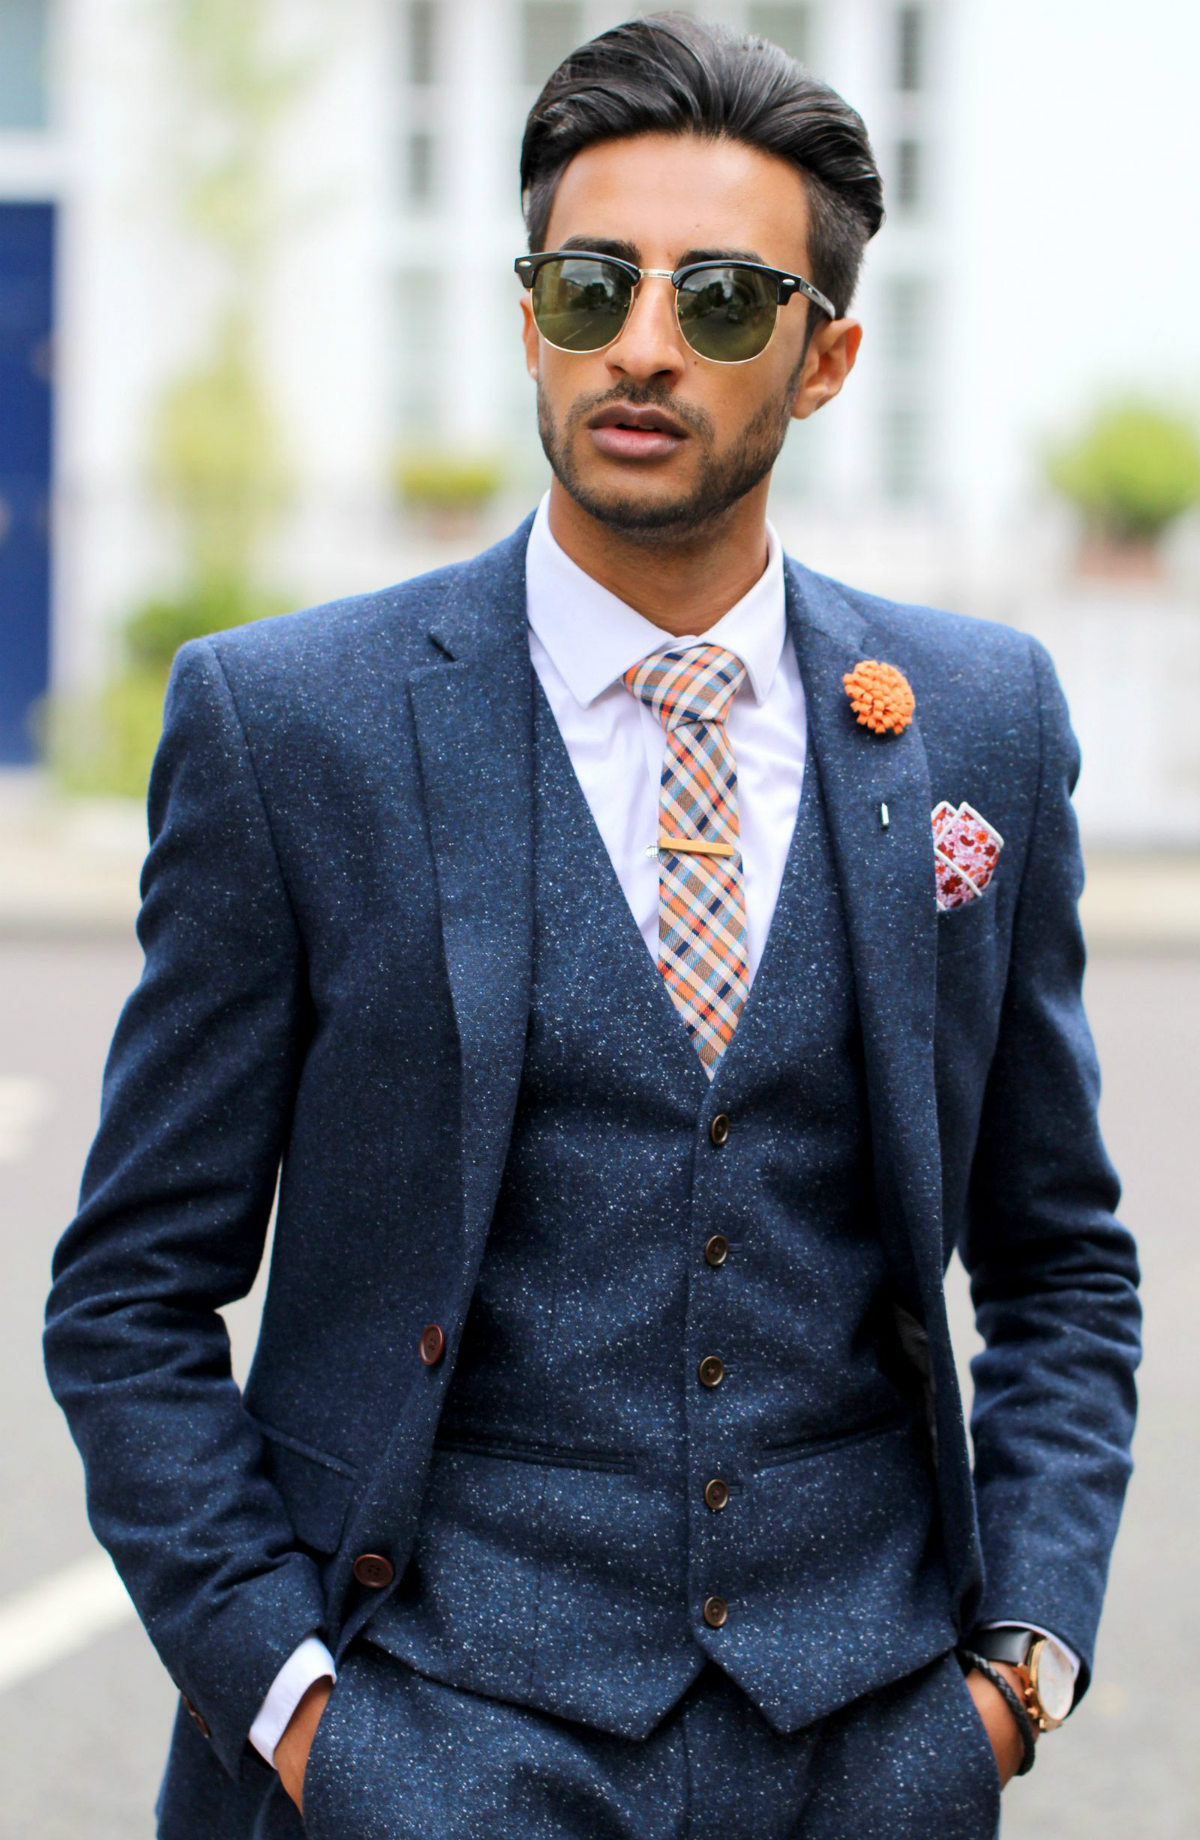 man-in-the-suit-with-the-pocket-square-tie-lapel-pin-and-other-accessories-1600